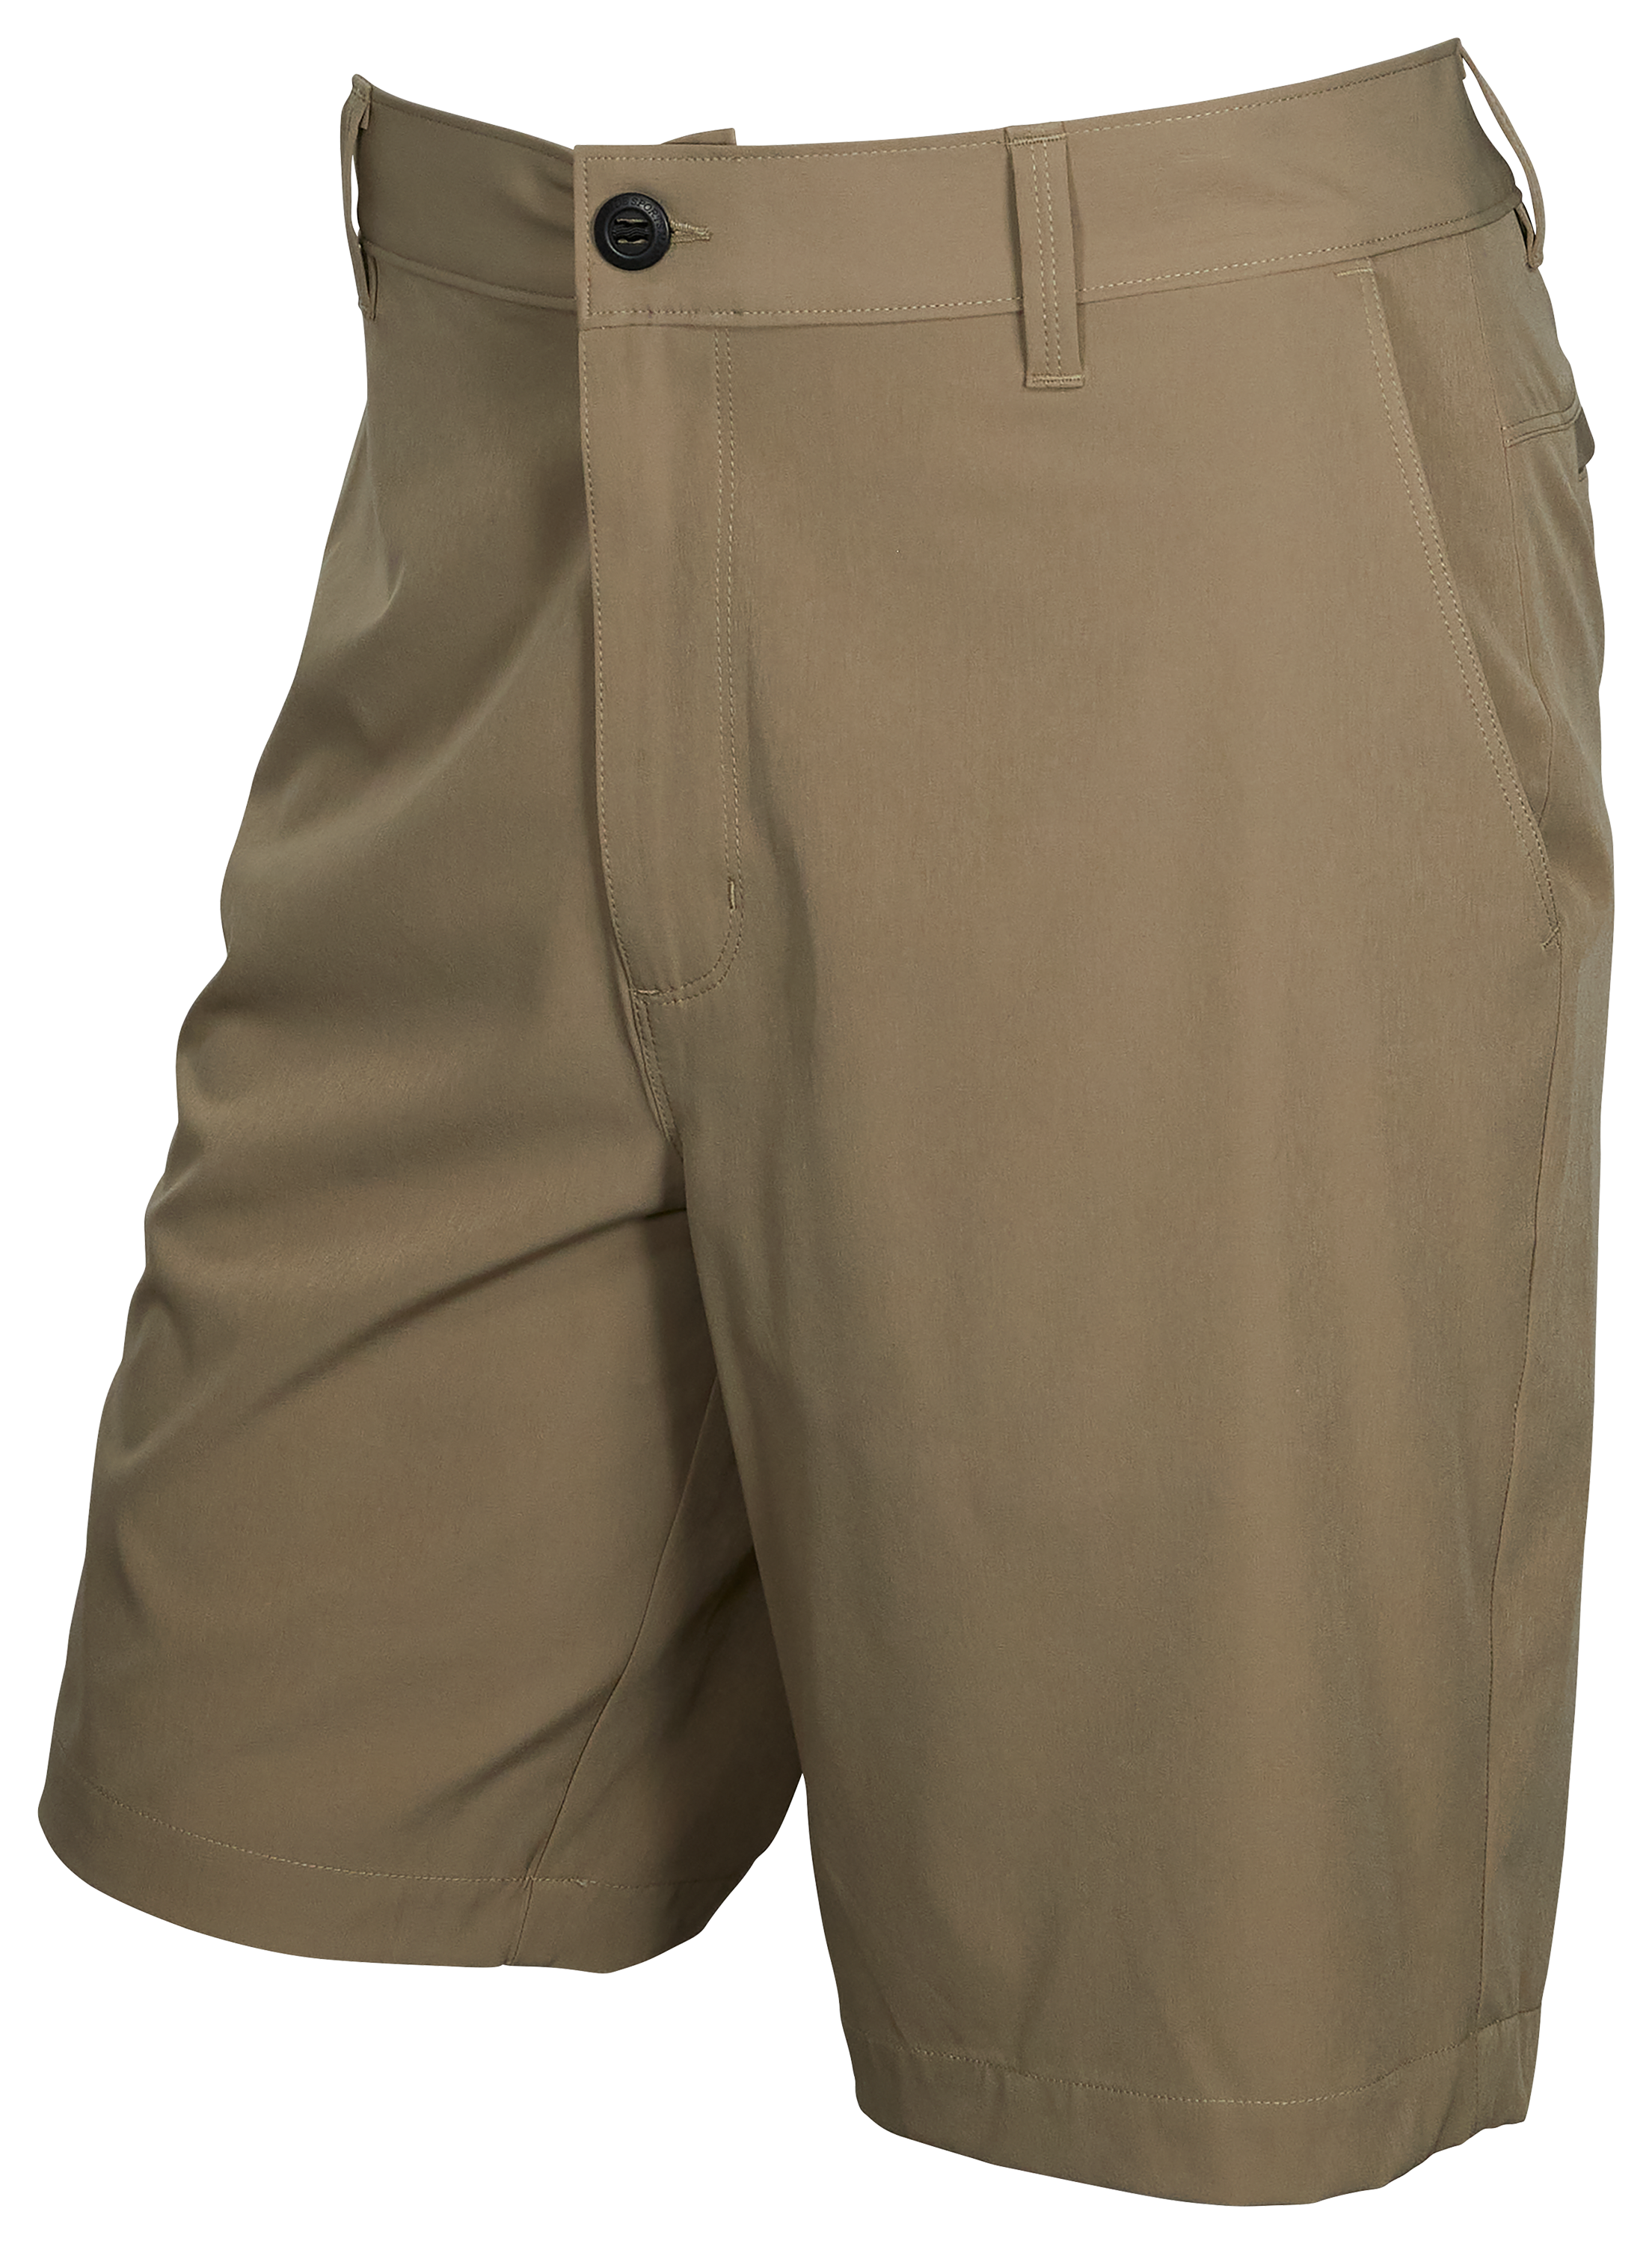 World Wide Sportsman Pescador Stretch Fishing Shorts for Men - Timber - 36